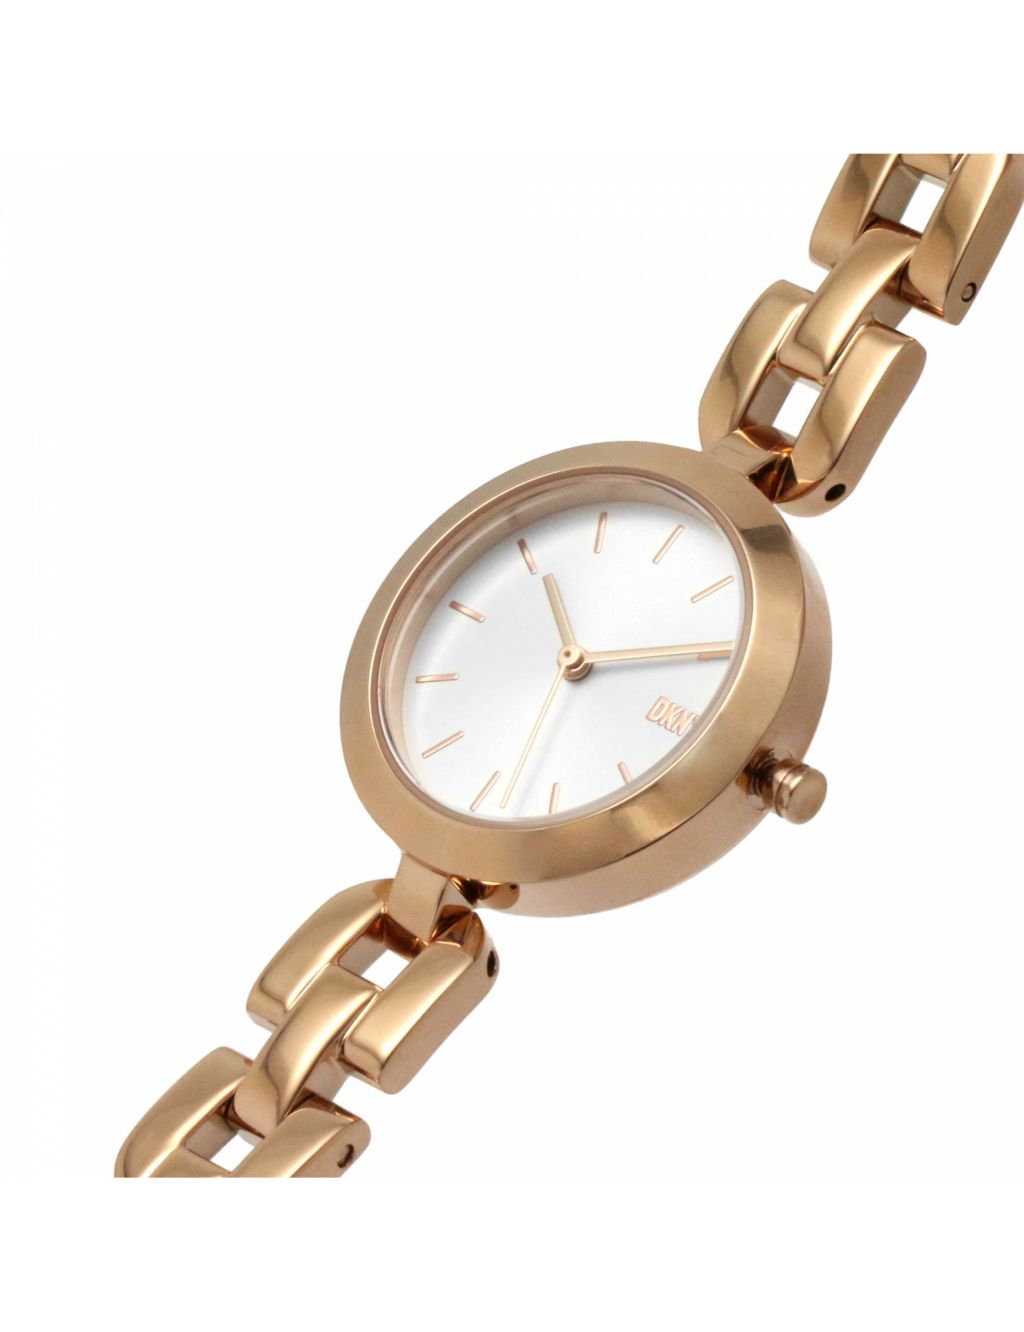 DKNY City Link Stainless Steel Watch image 3